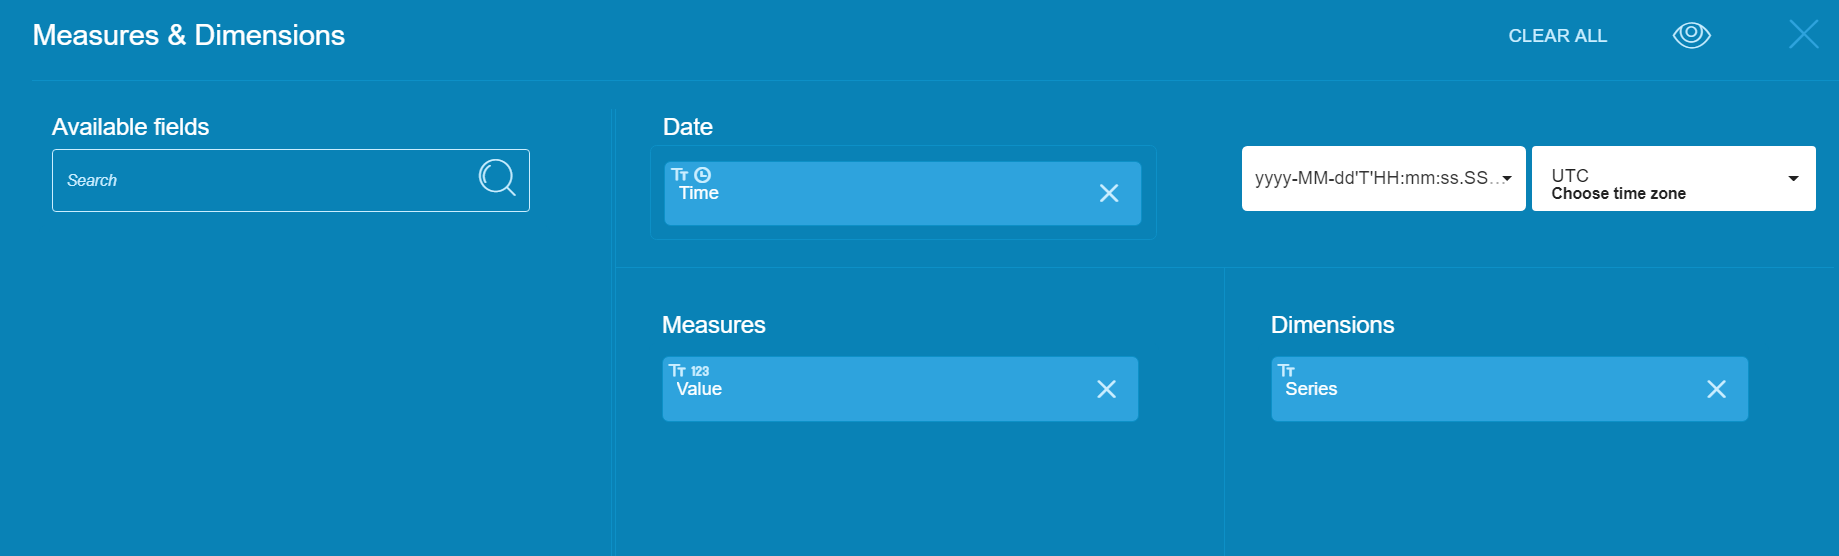 CSV_measures_and_dimensions_panel.png